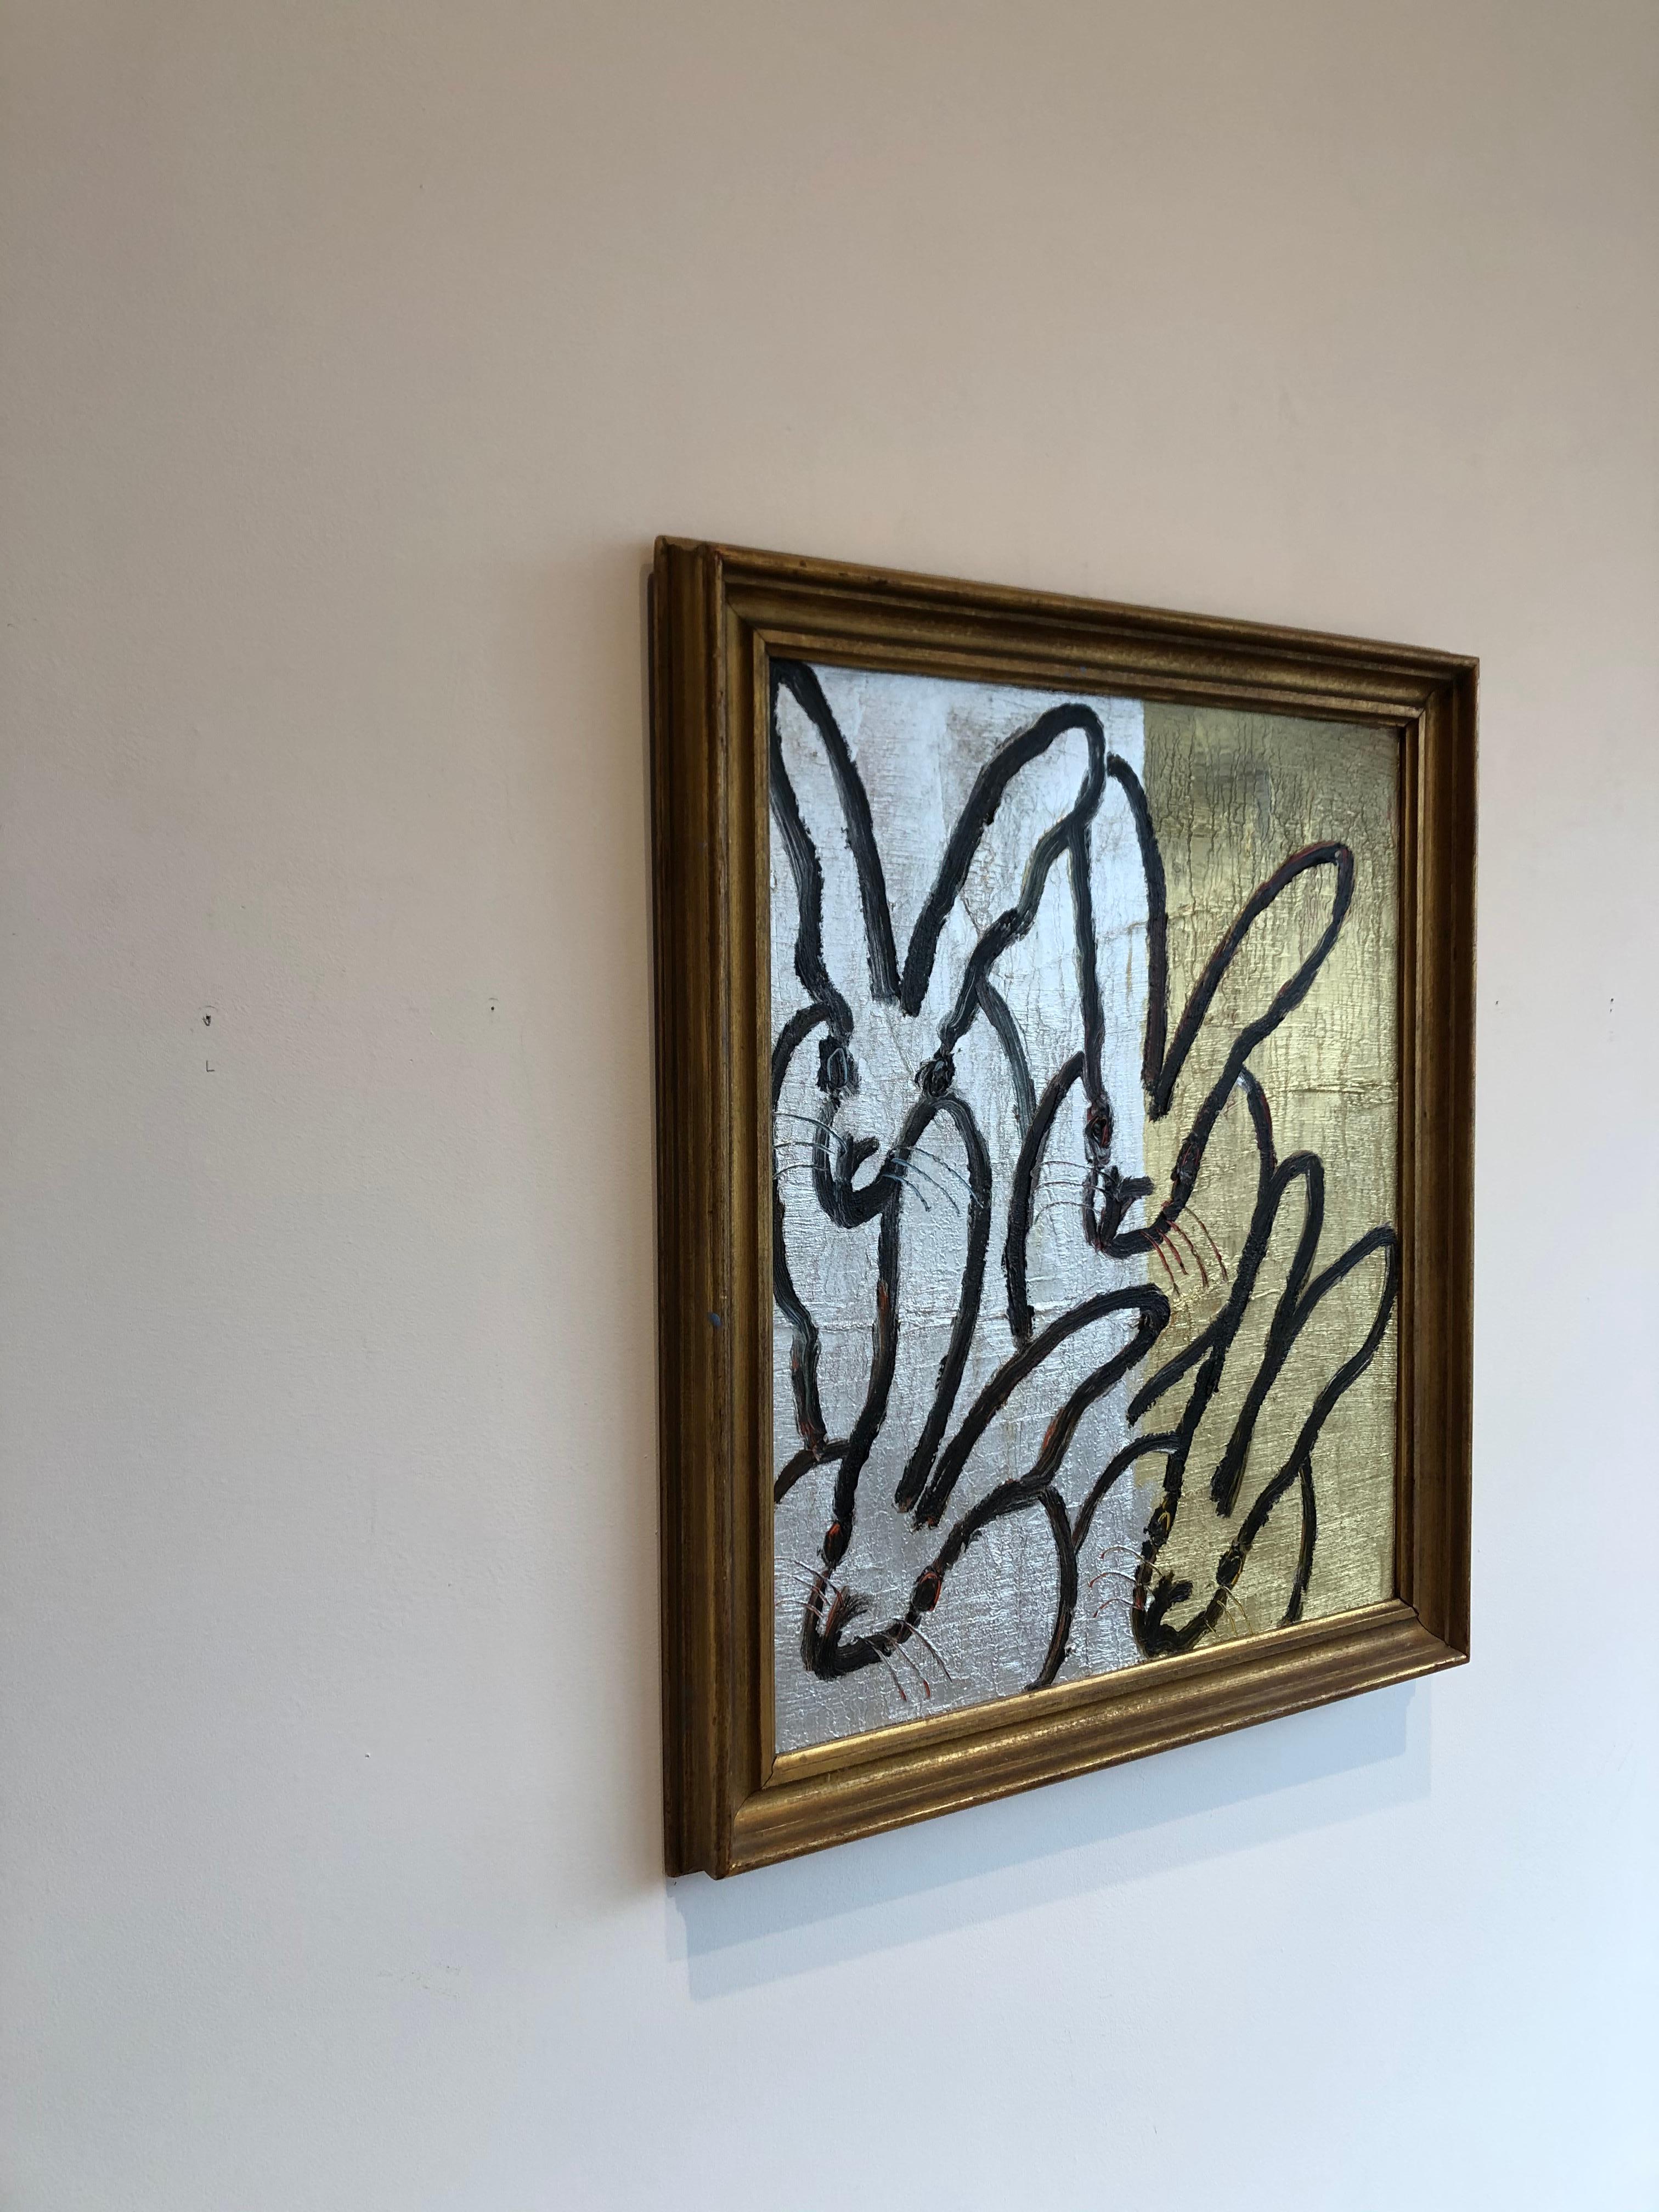 Inspired by nature and his 60 pet birds, Hunt Slonem is renowned for his distinct neo-expressionist style. He is best known for his series of bunnies, butterflies and tropical birds, as well as his large-scale sculptures and restorations of